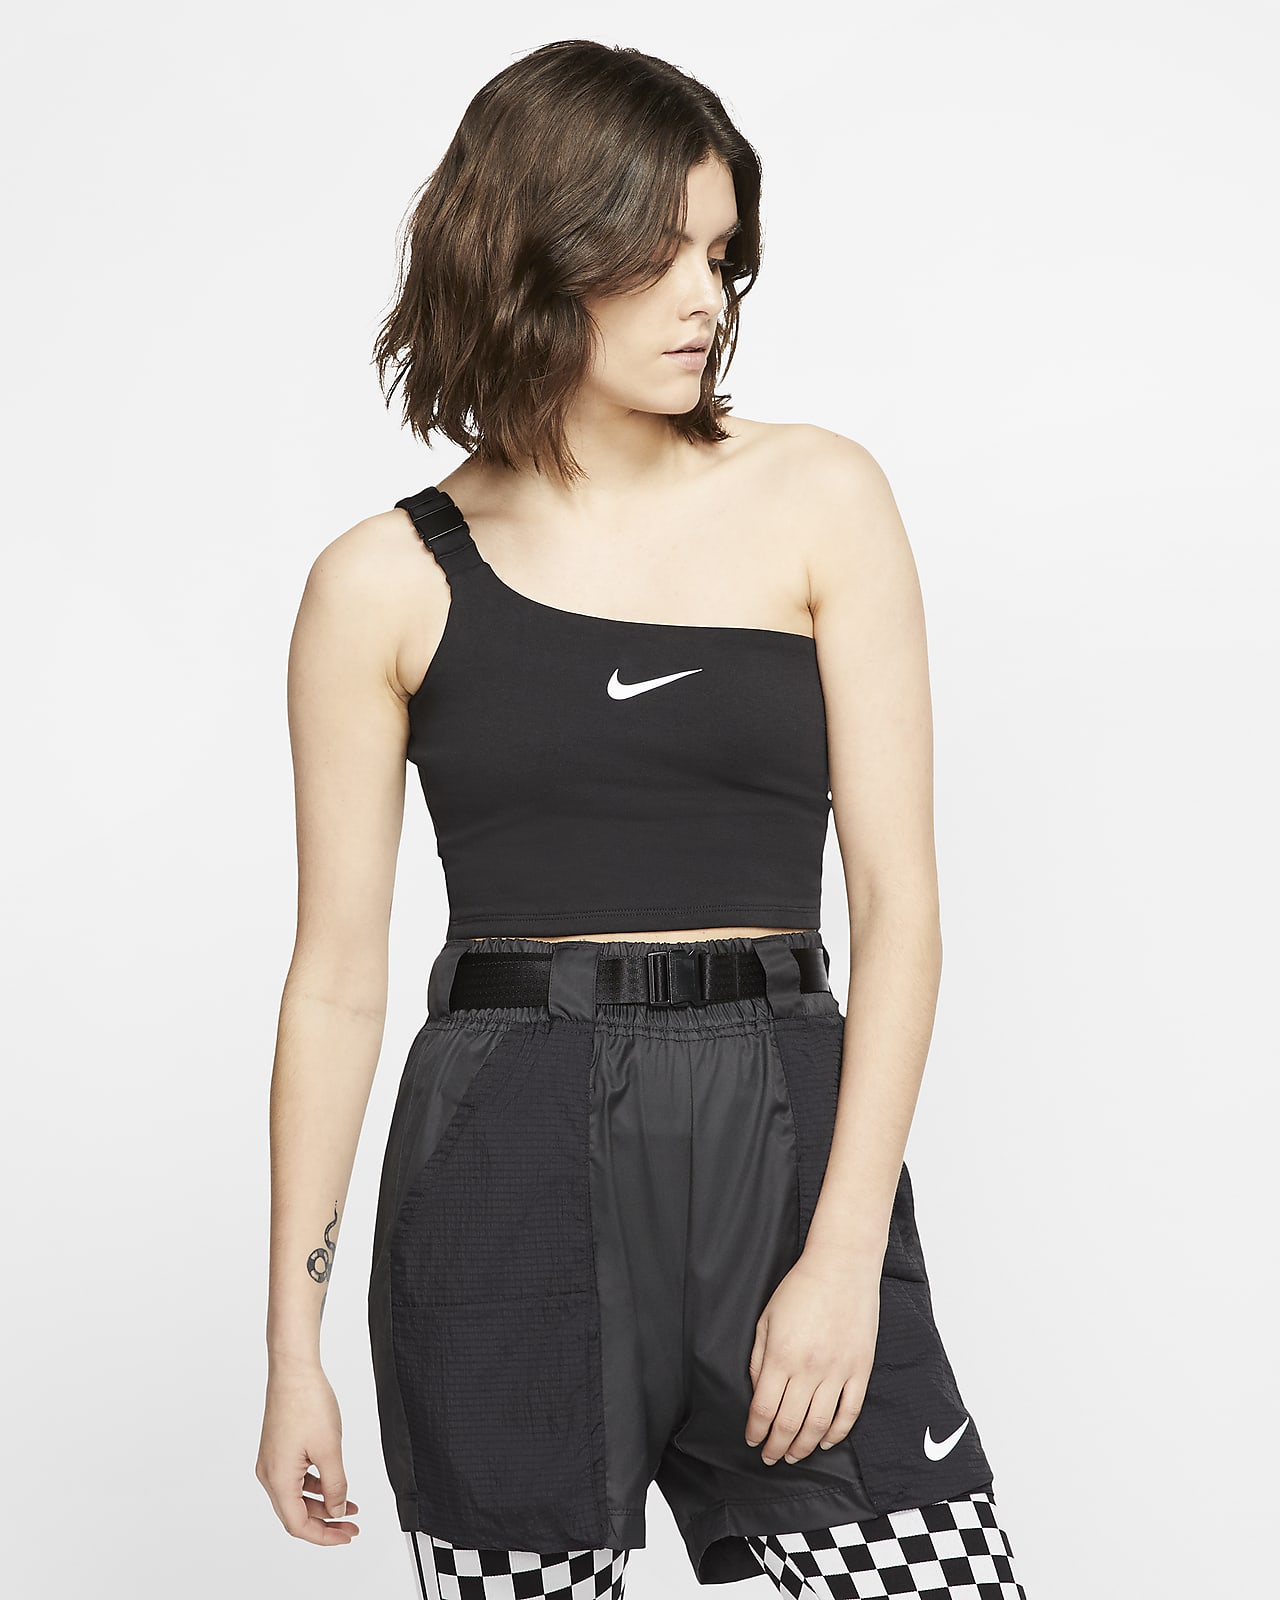 nike shorts and crop top